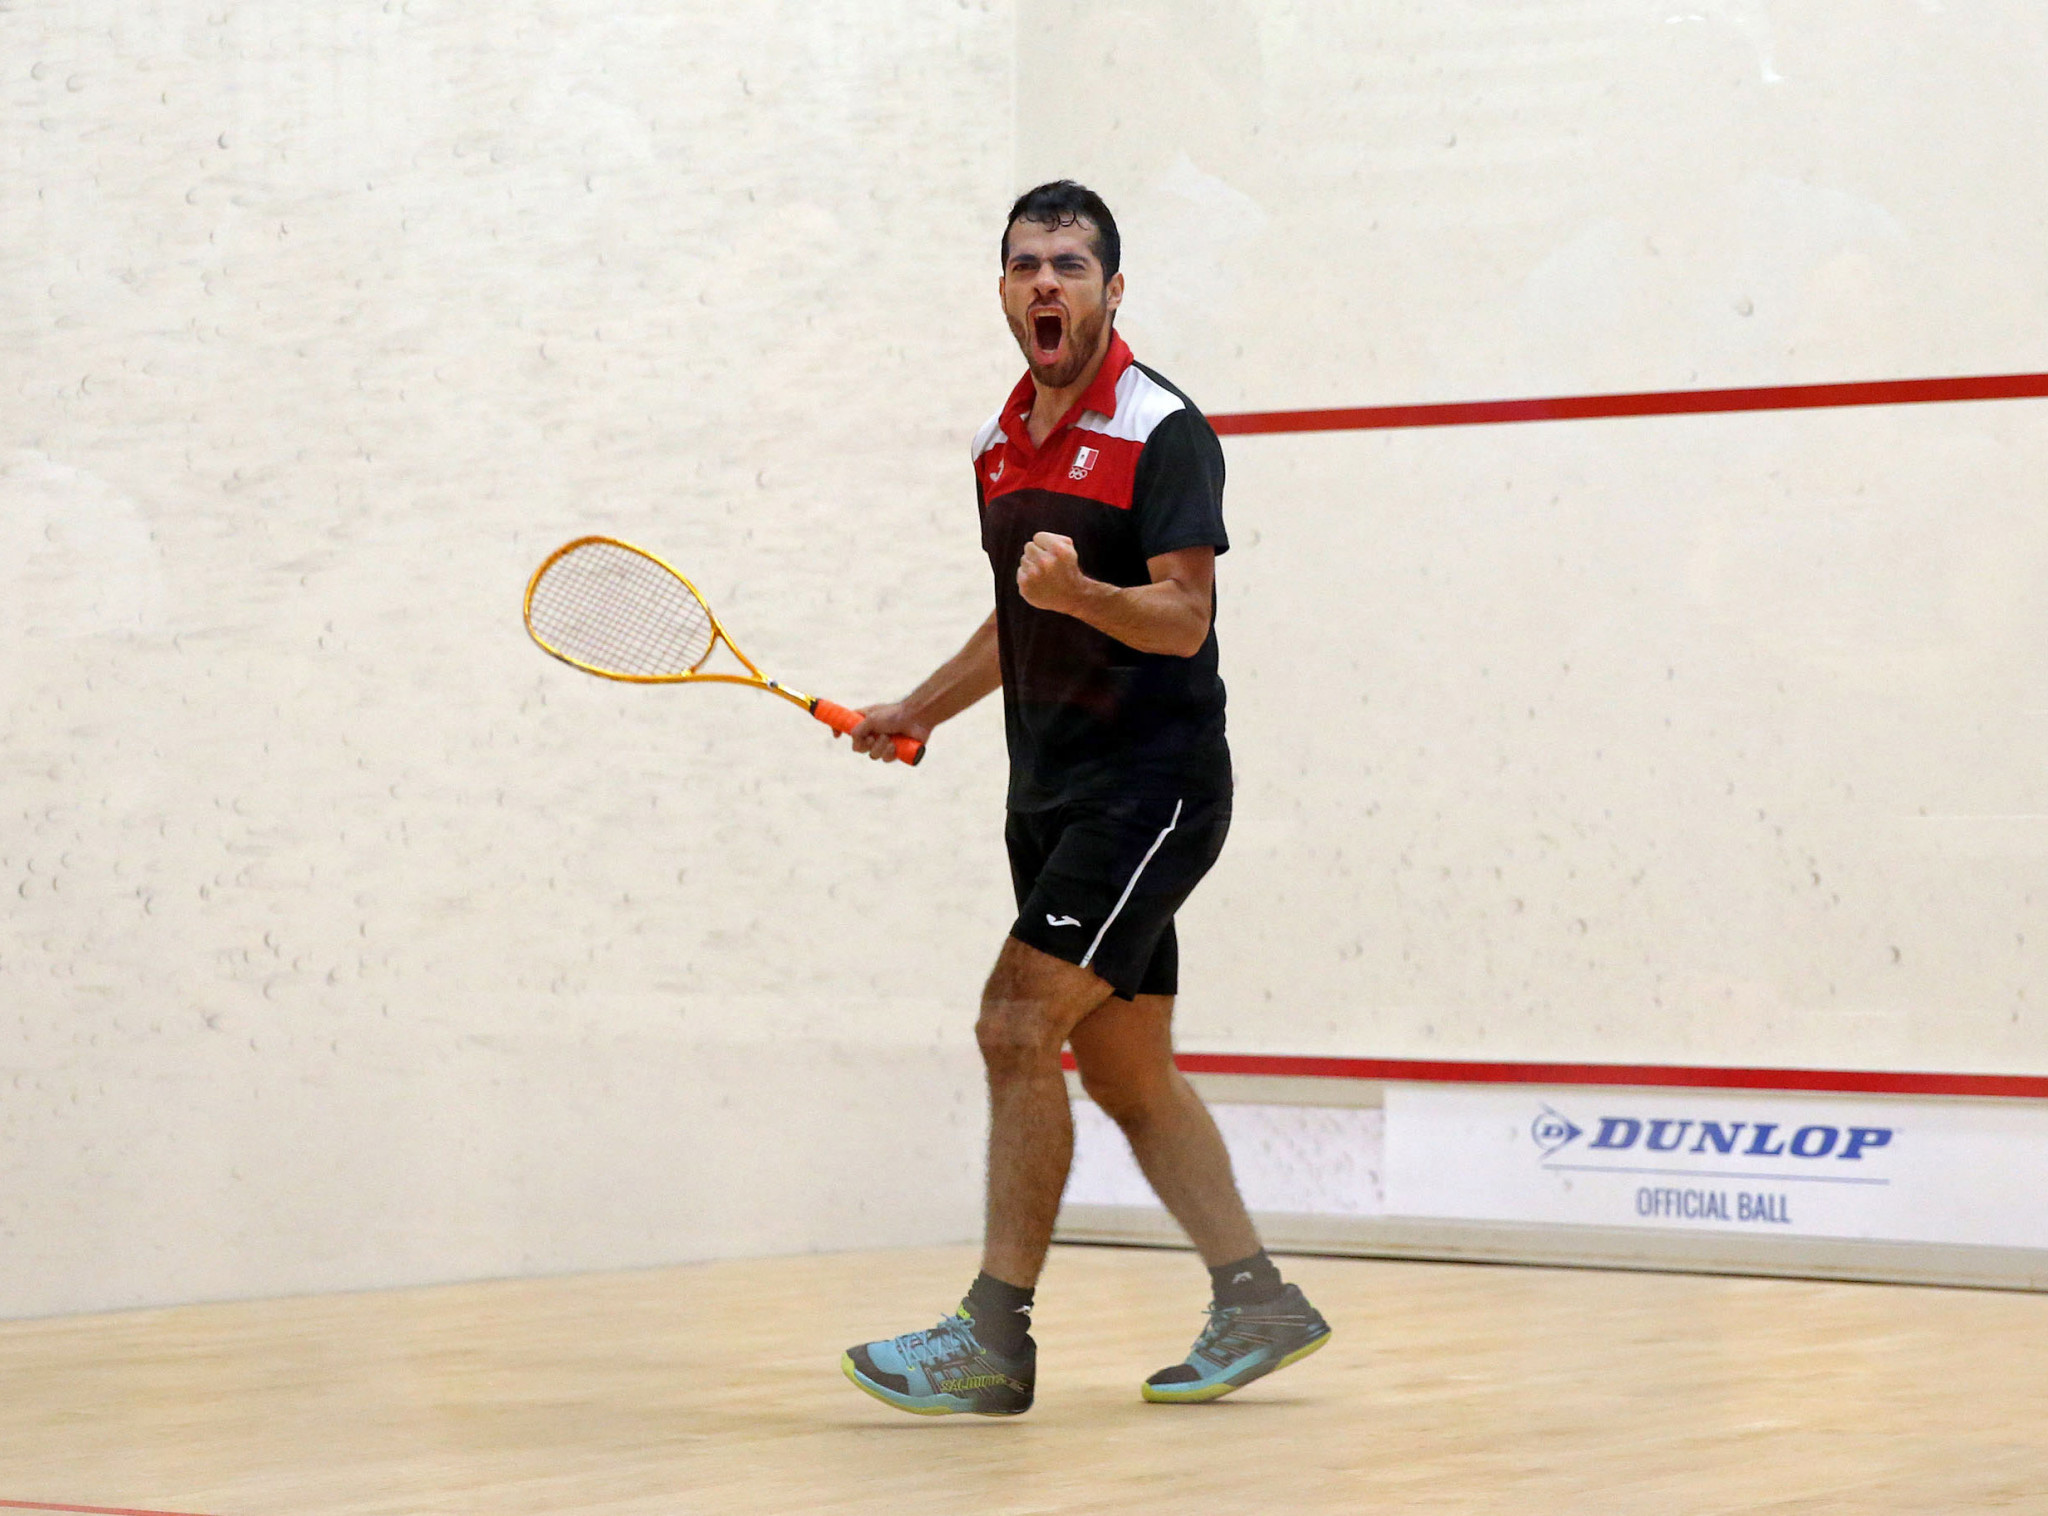 Mexico's Arturo Salazar en-route to booking his place in round two of the PSA Oracle Netsuite Open in San Francisco ©PSA